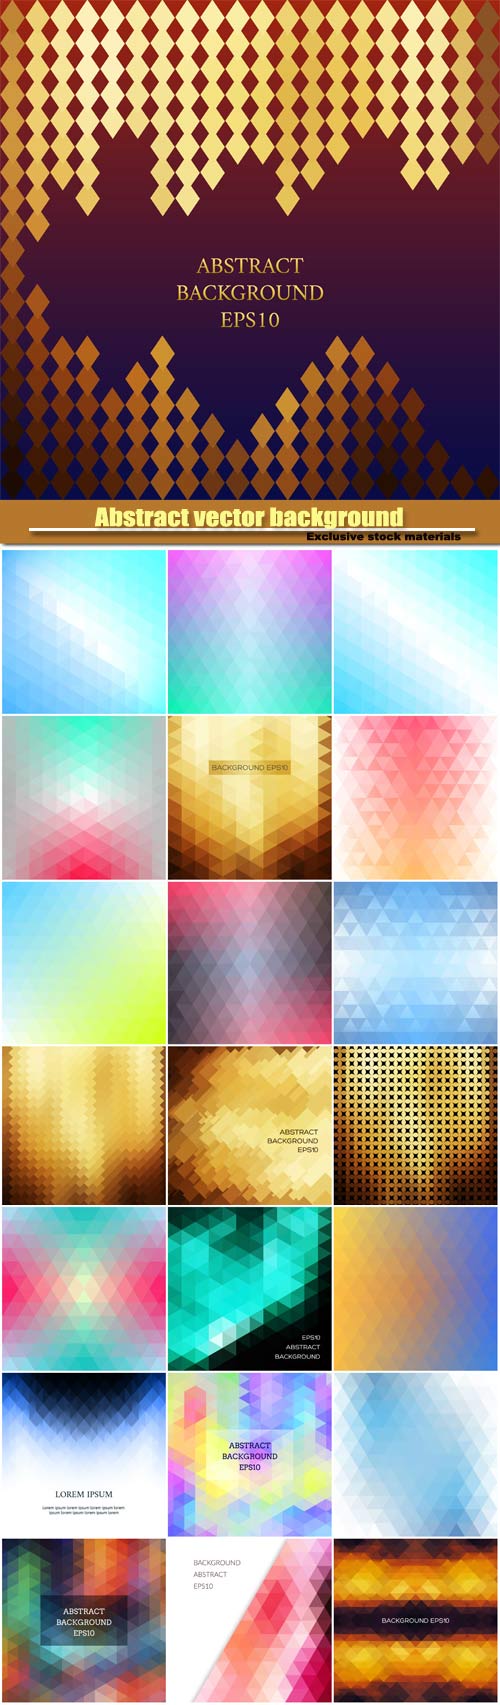 Abstract vector background in isometric style, geometric pattern